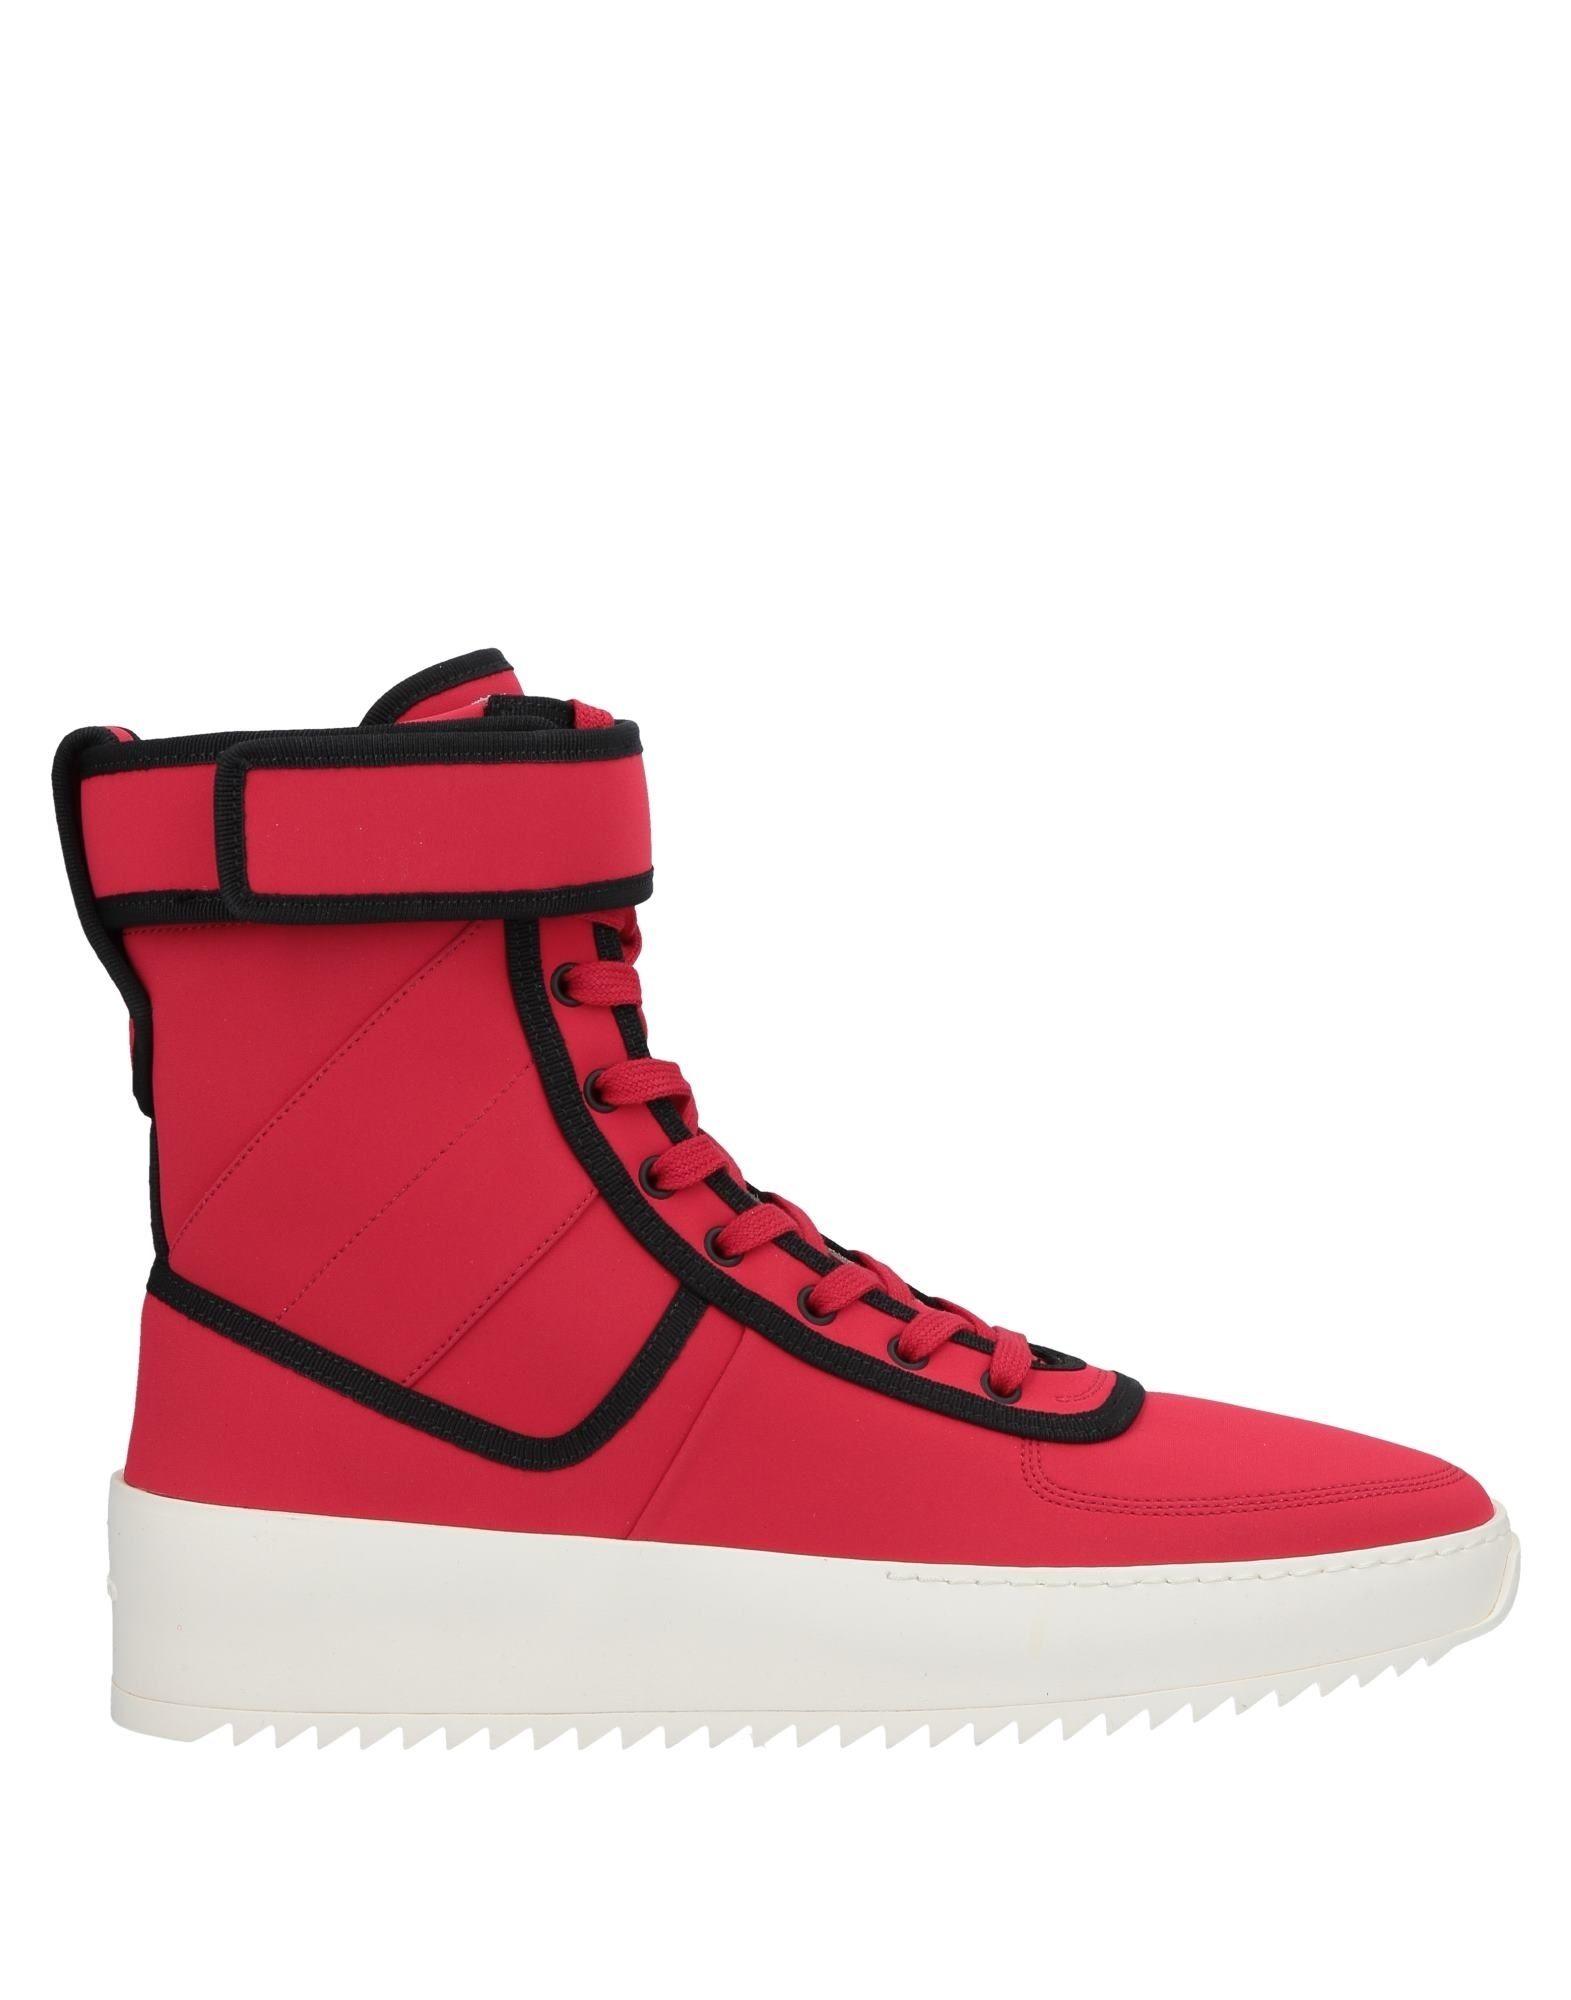 Fear Of God High-tops & Sneakers in Red for Men - Lyst